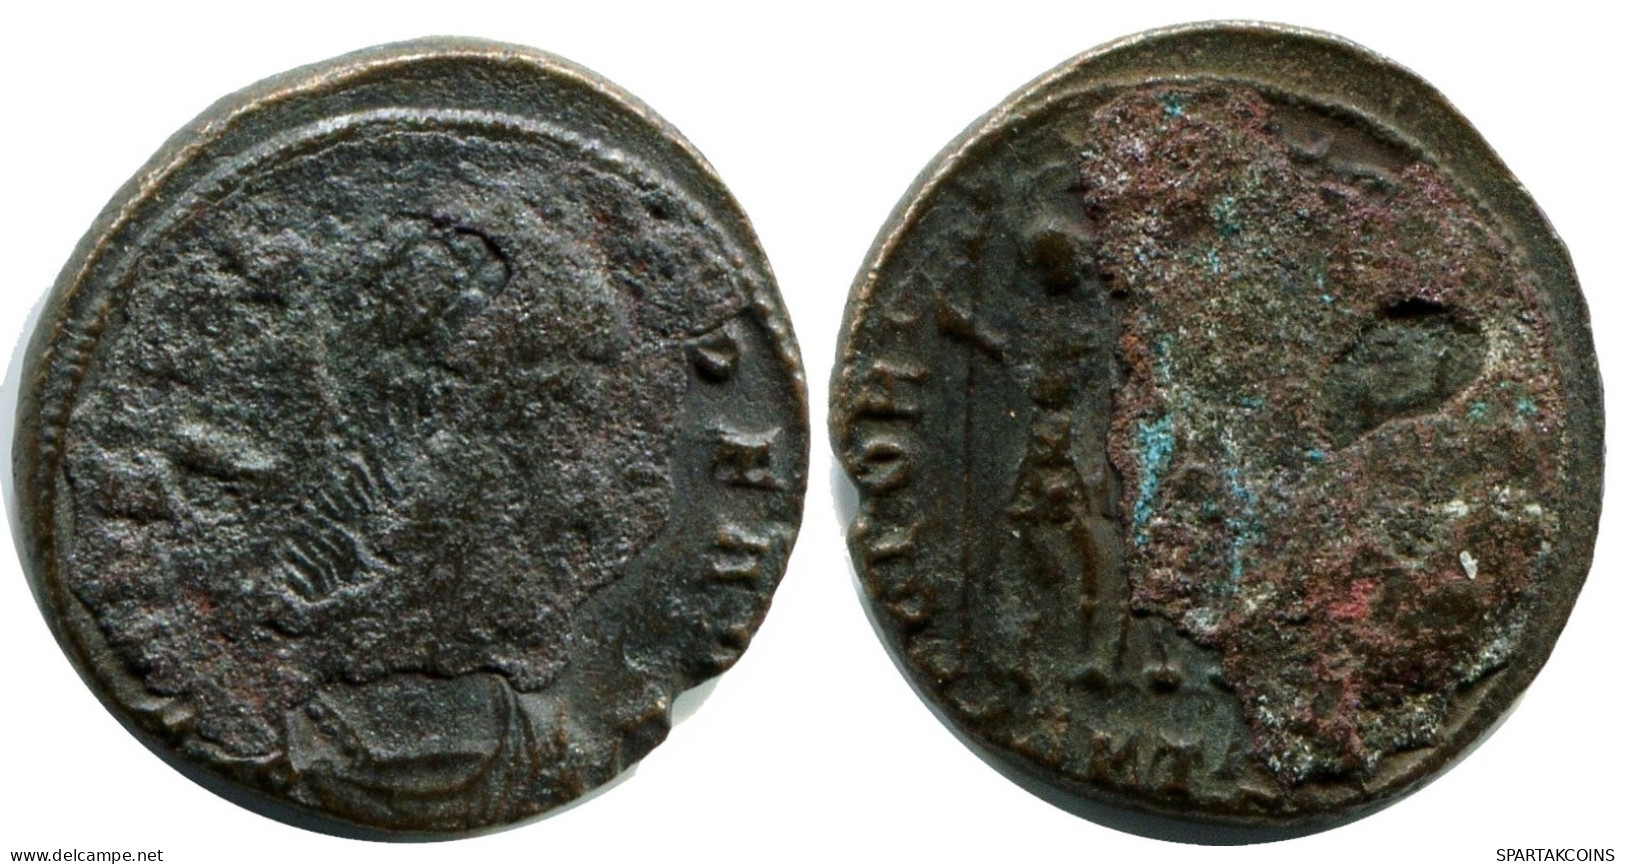 CONSTANS MINTED IN THESSALONICA FROM THE ROYAL ONTARIO MUSEUM #ANC11917.14.U.A - Der Christlischen Kaiser (307 / 363)